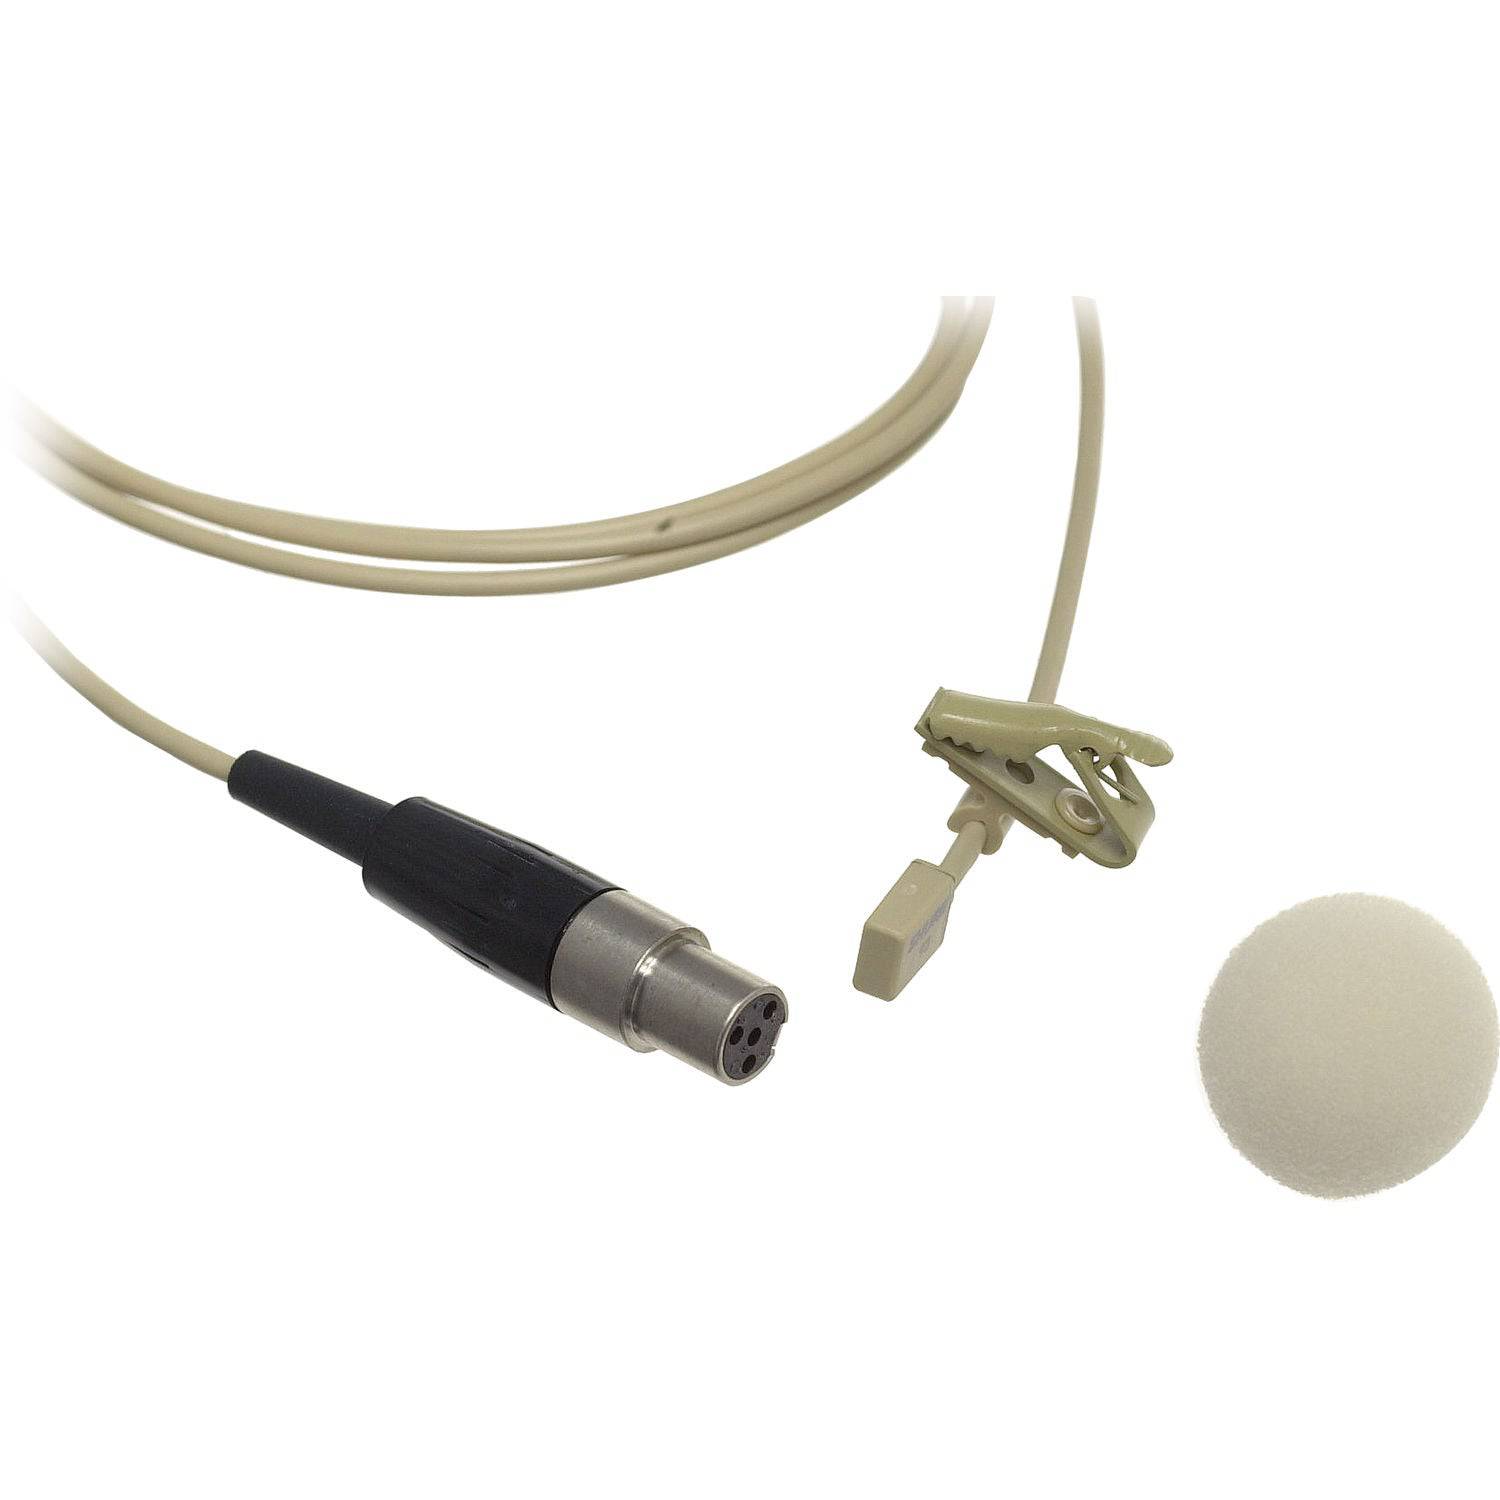 Shure WL93T Miniature Lavalier Microphone with 4 Feet Cable and TA4F Connector - TAN - Hollywood DJ